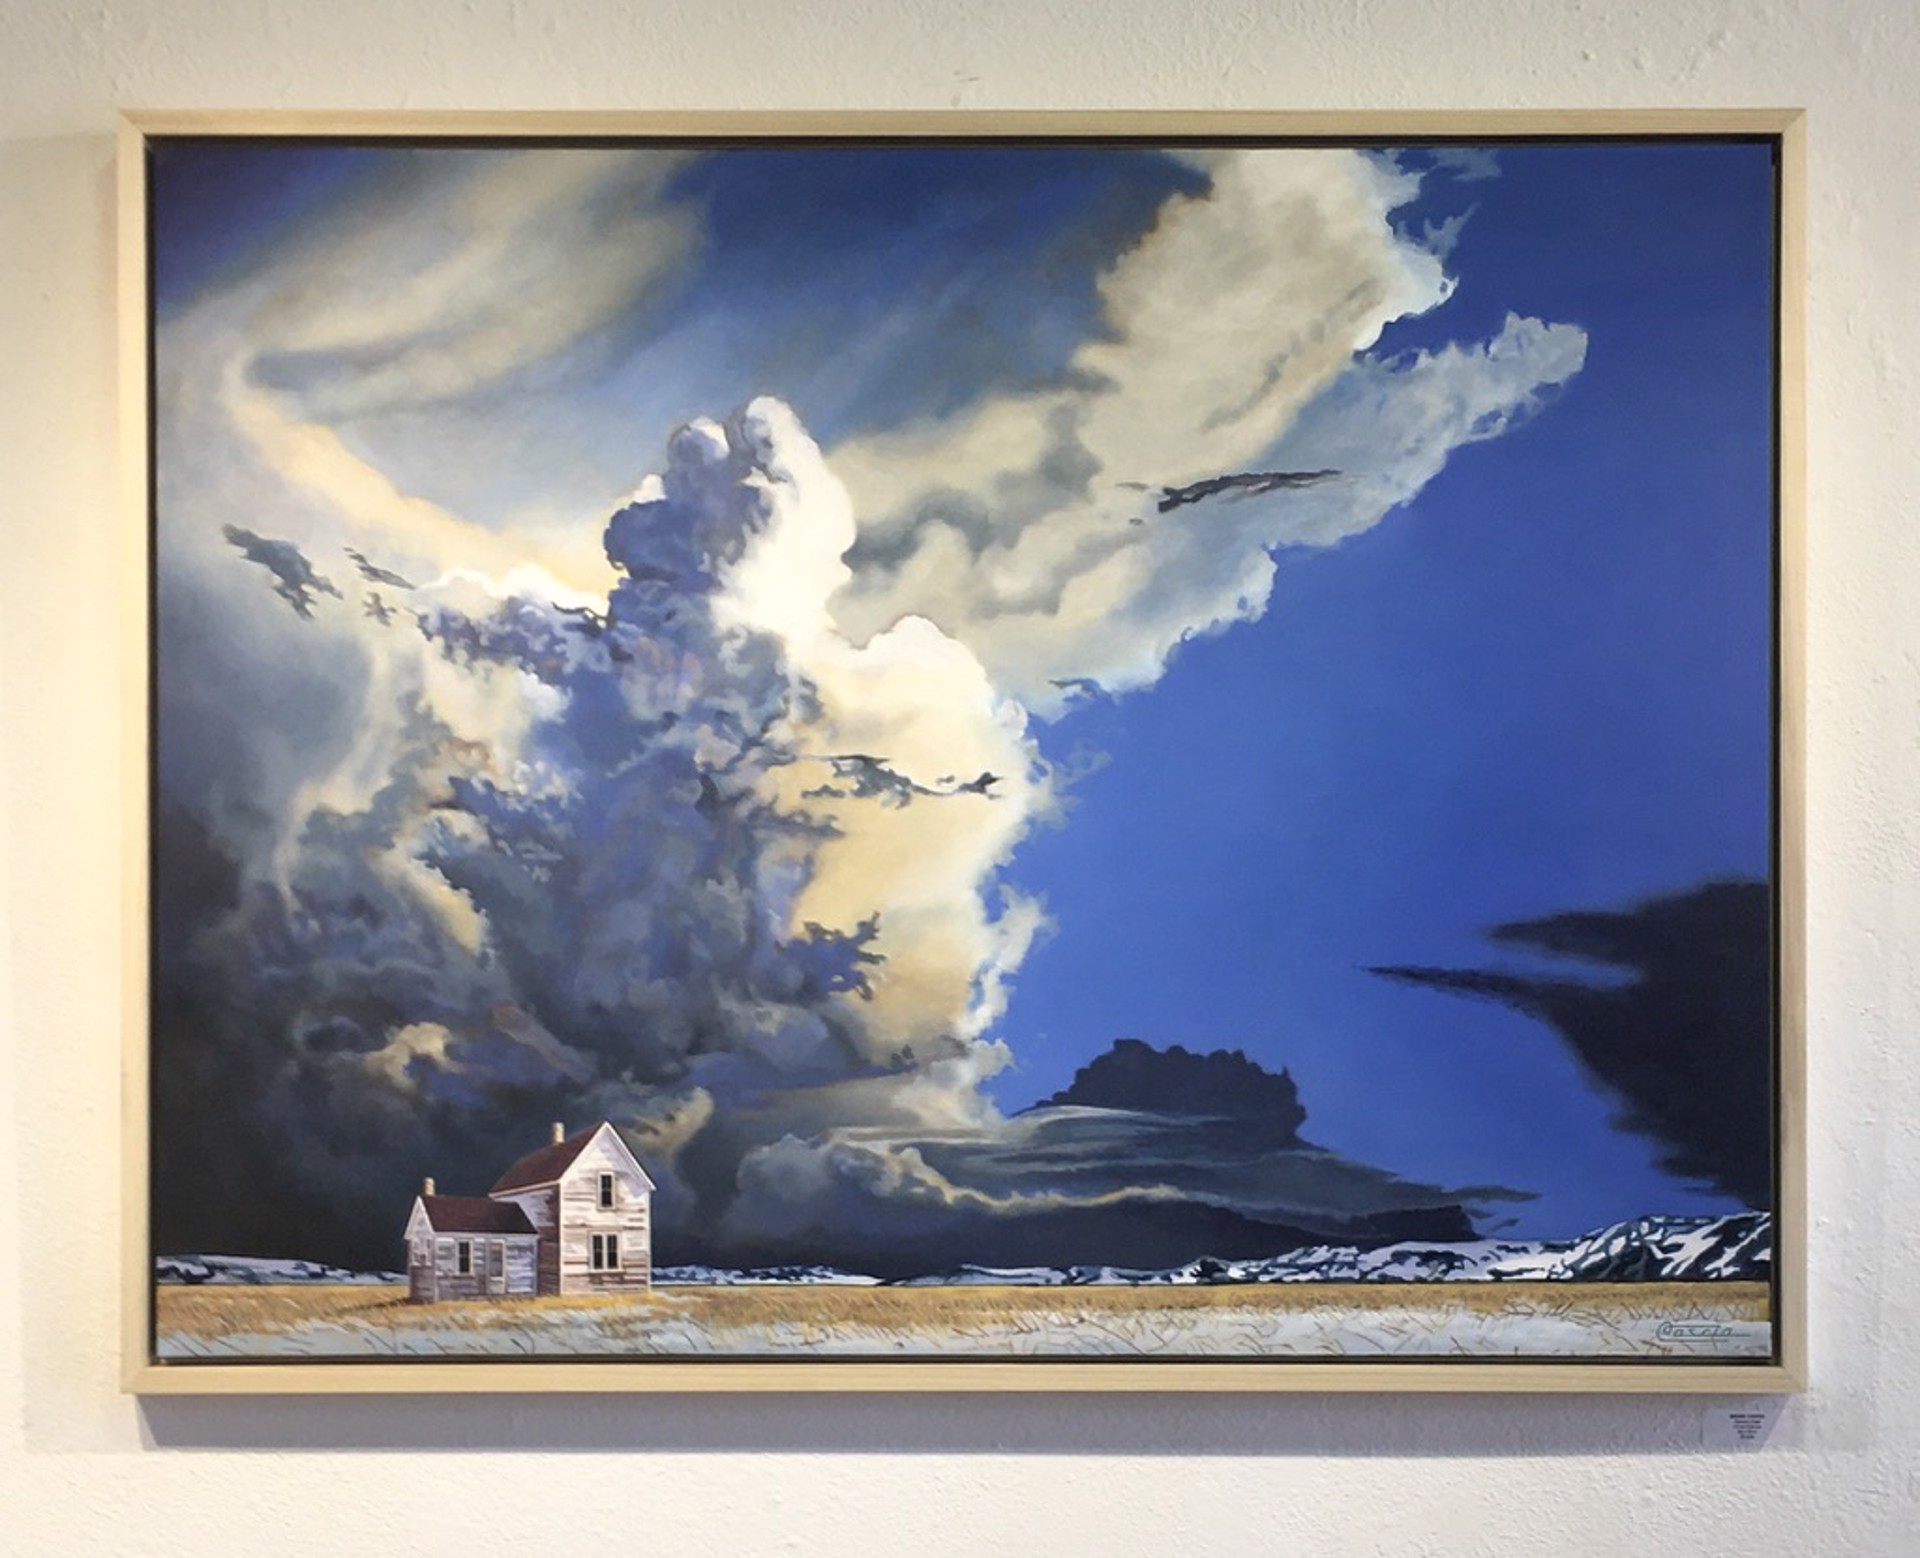 Storm's Edge (SOLD) by BRUCE CASCIA